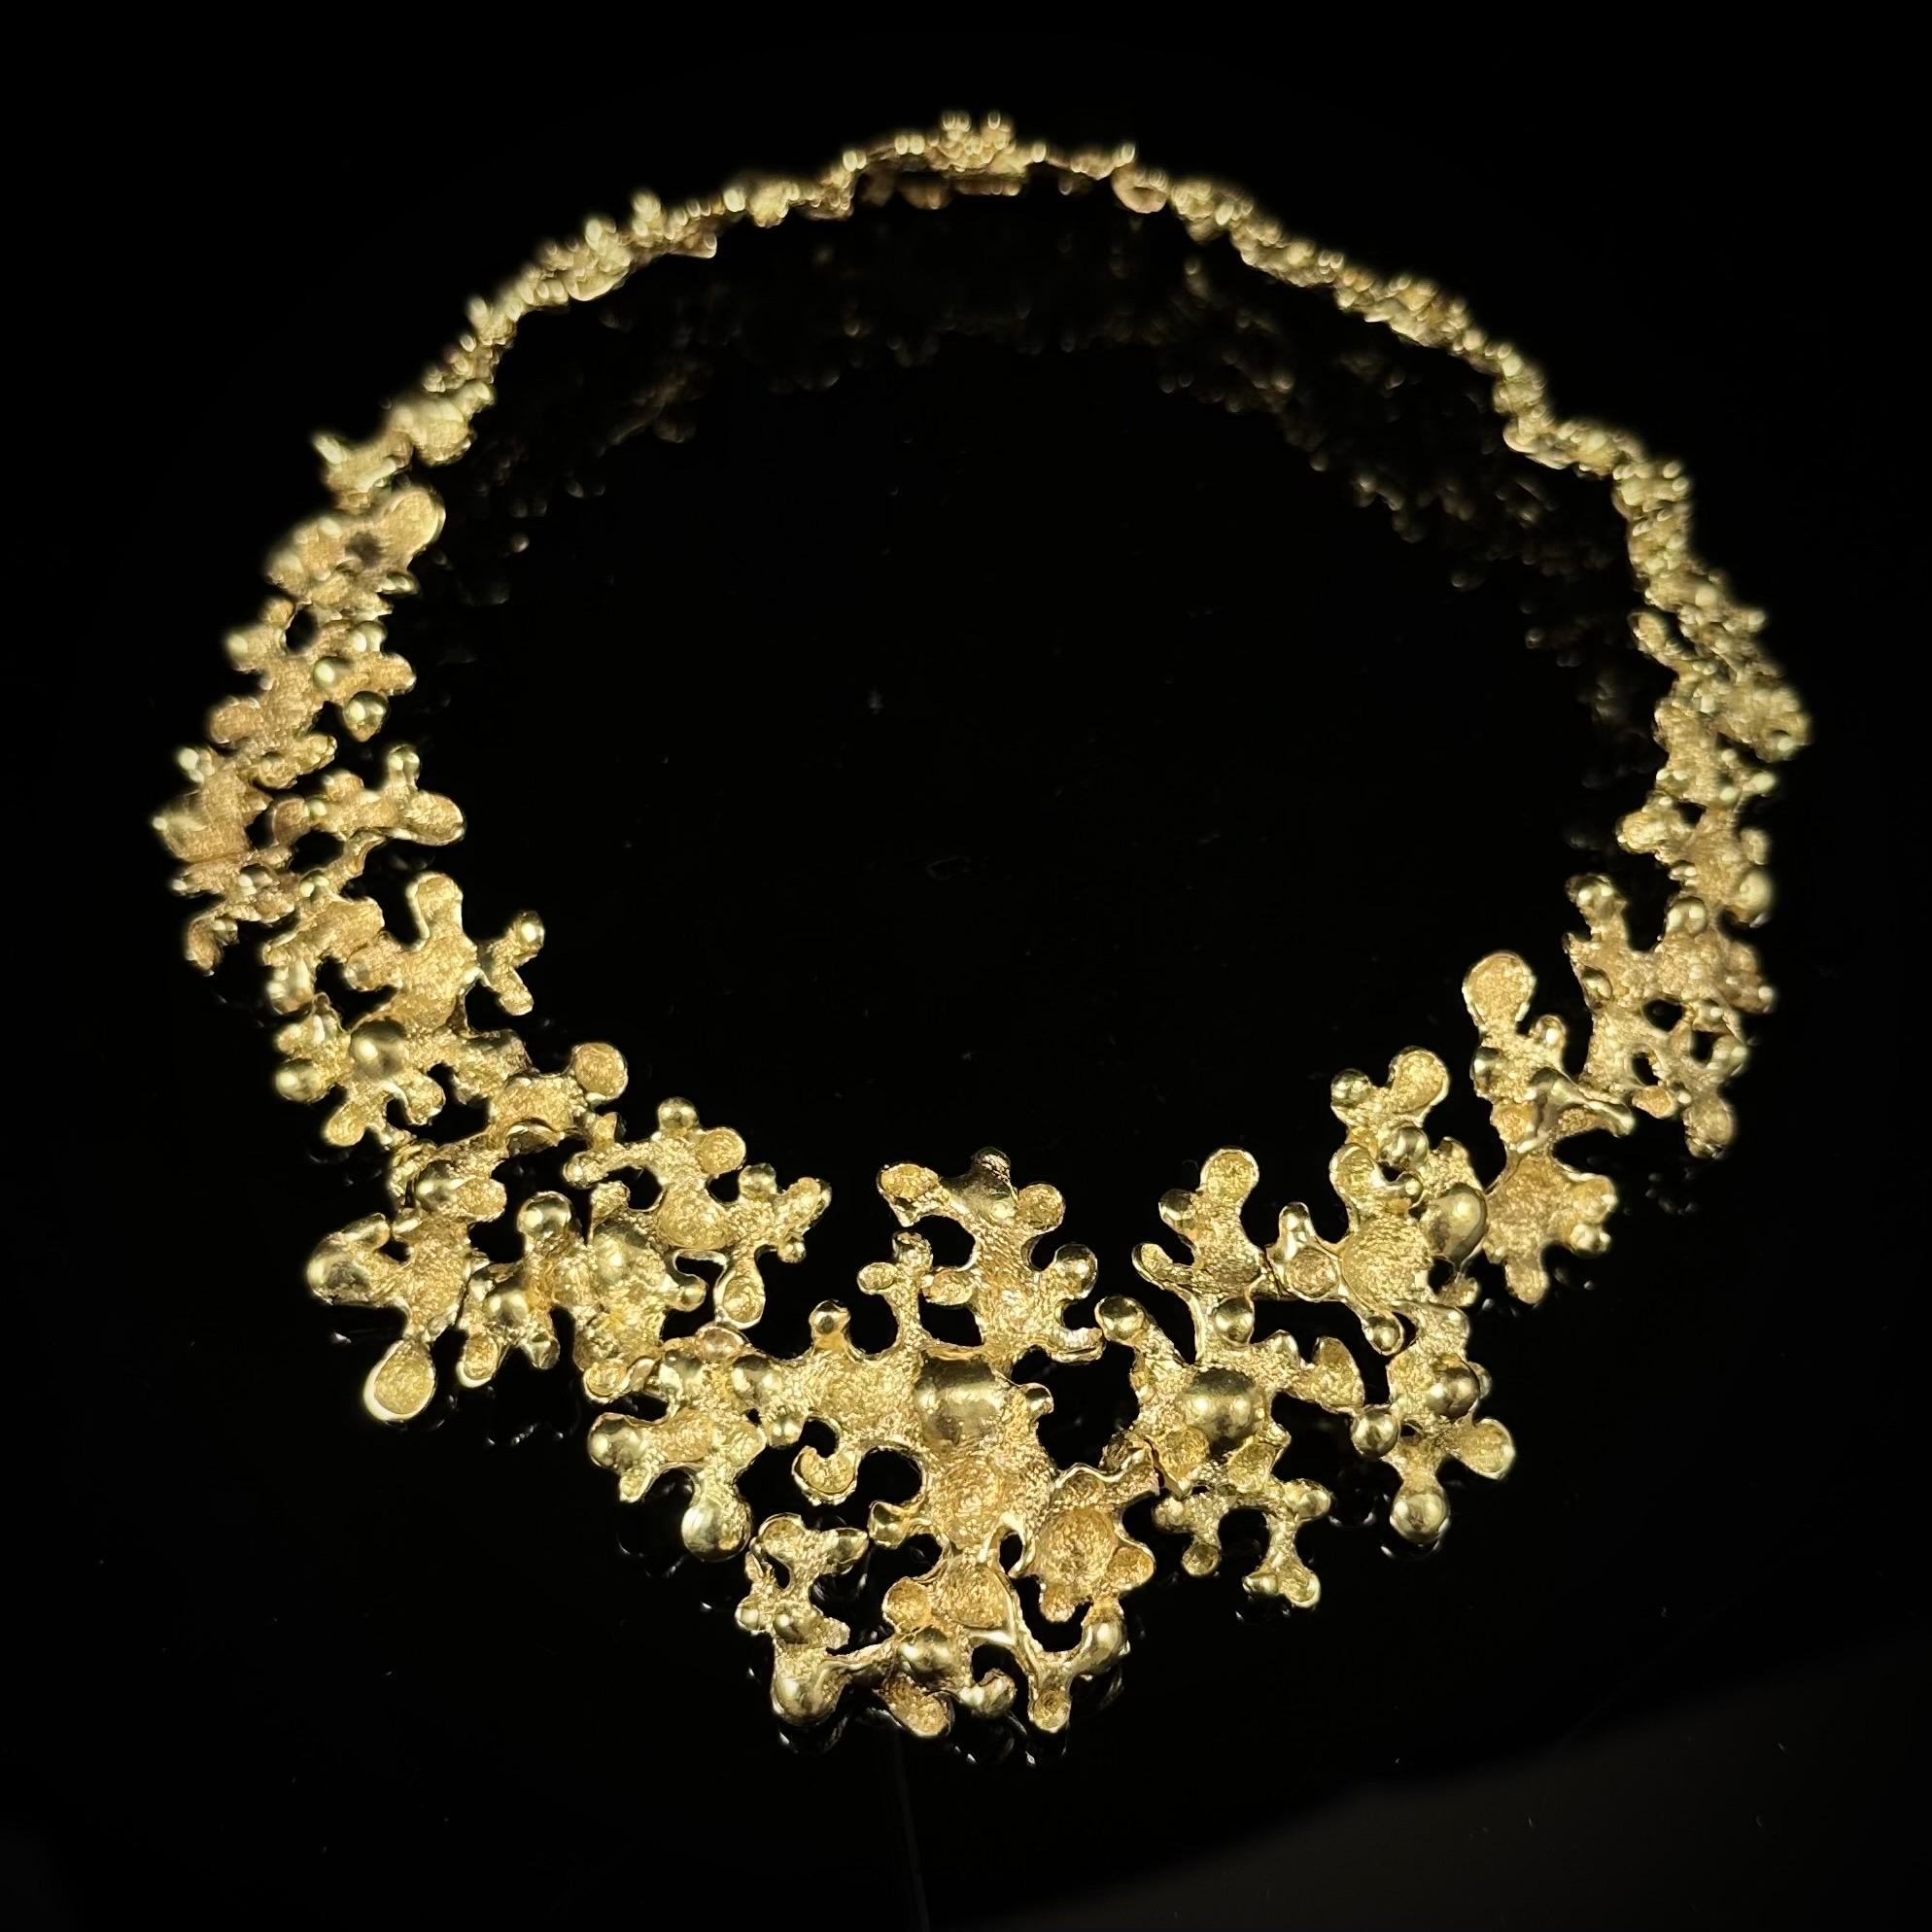 Gilbert Albert vintage floral bib necklace in 18kt yellow gold, Switzerland, 1970s. Modelled as a sequence of asymmetrical openwork floral botryoidal panels with both polished and granular textured decoration, graduating in size from larger sections